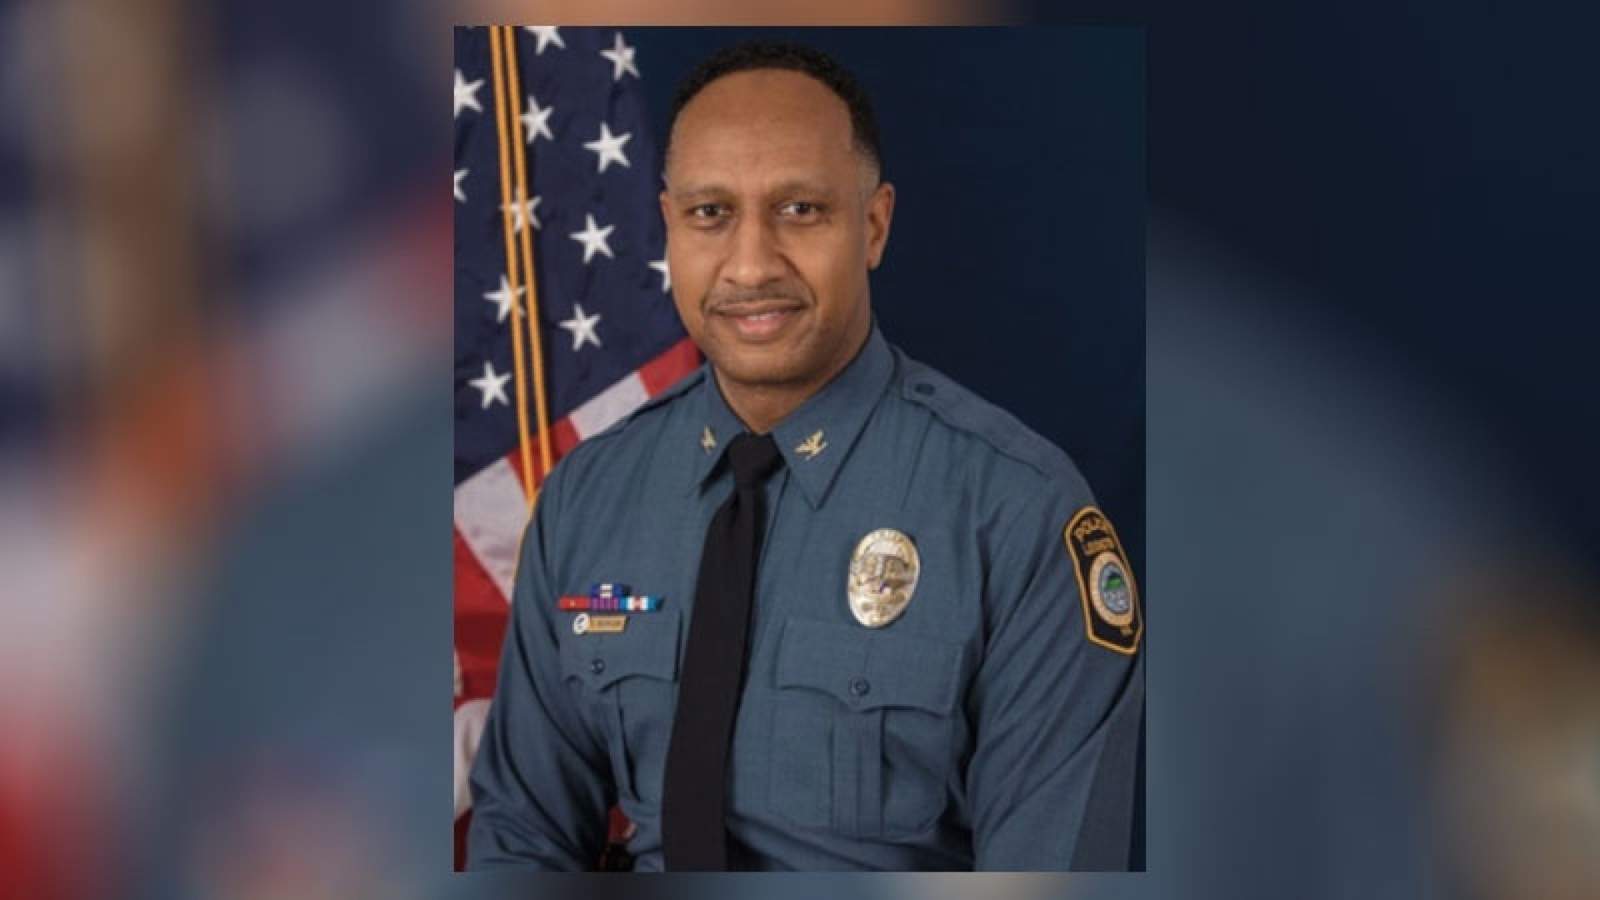 Roanoke’s incoming police chief says transparency is key